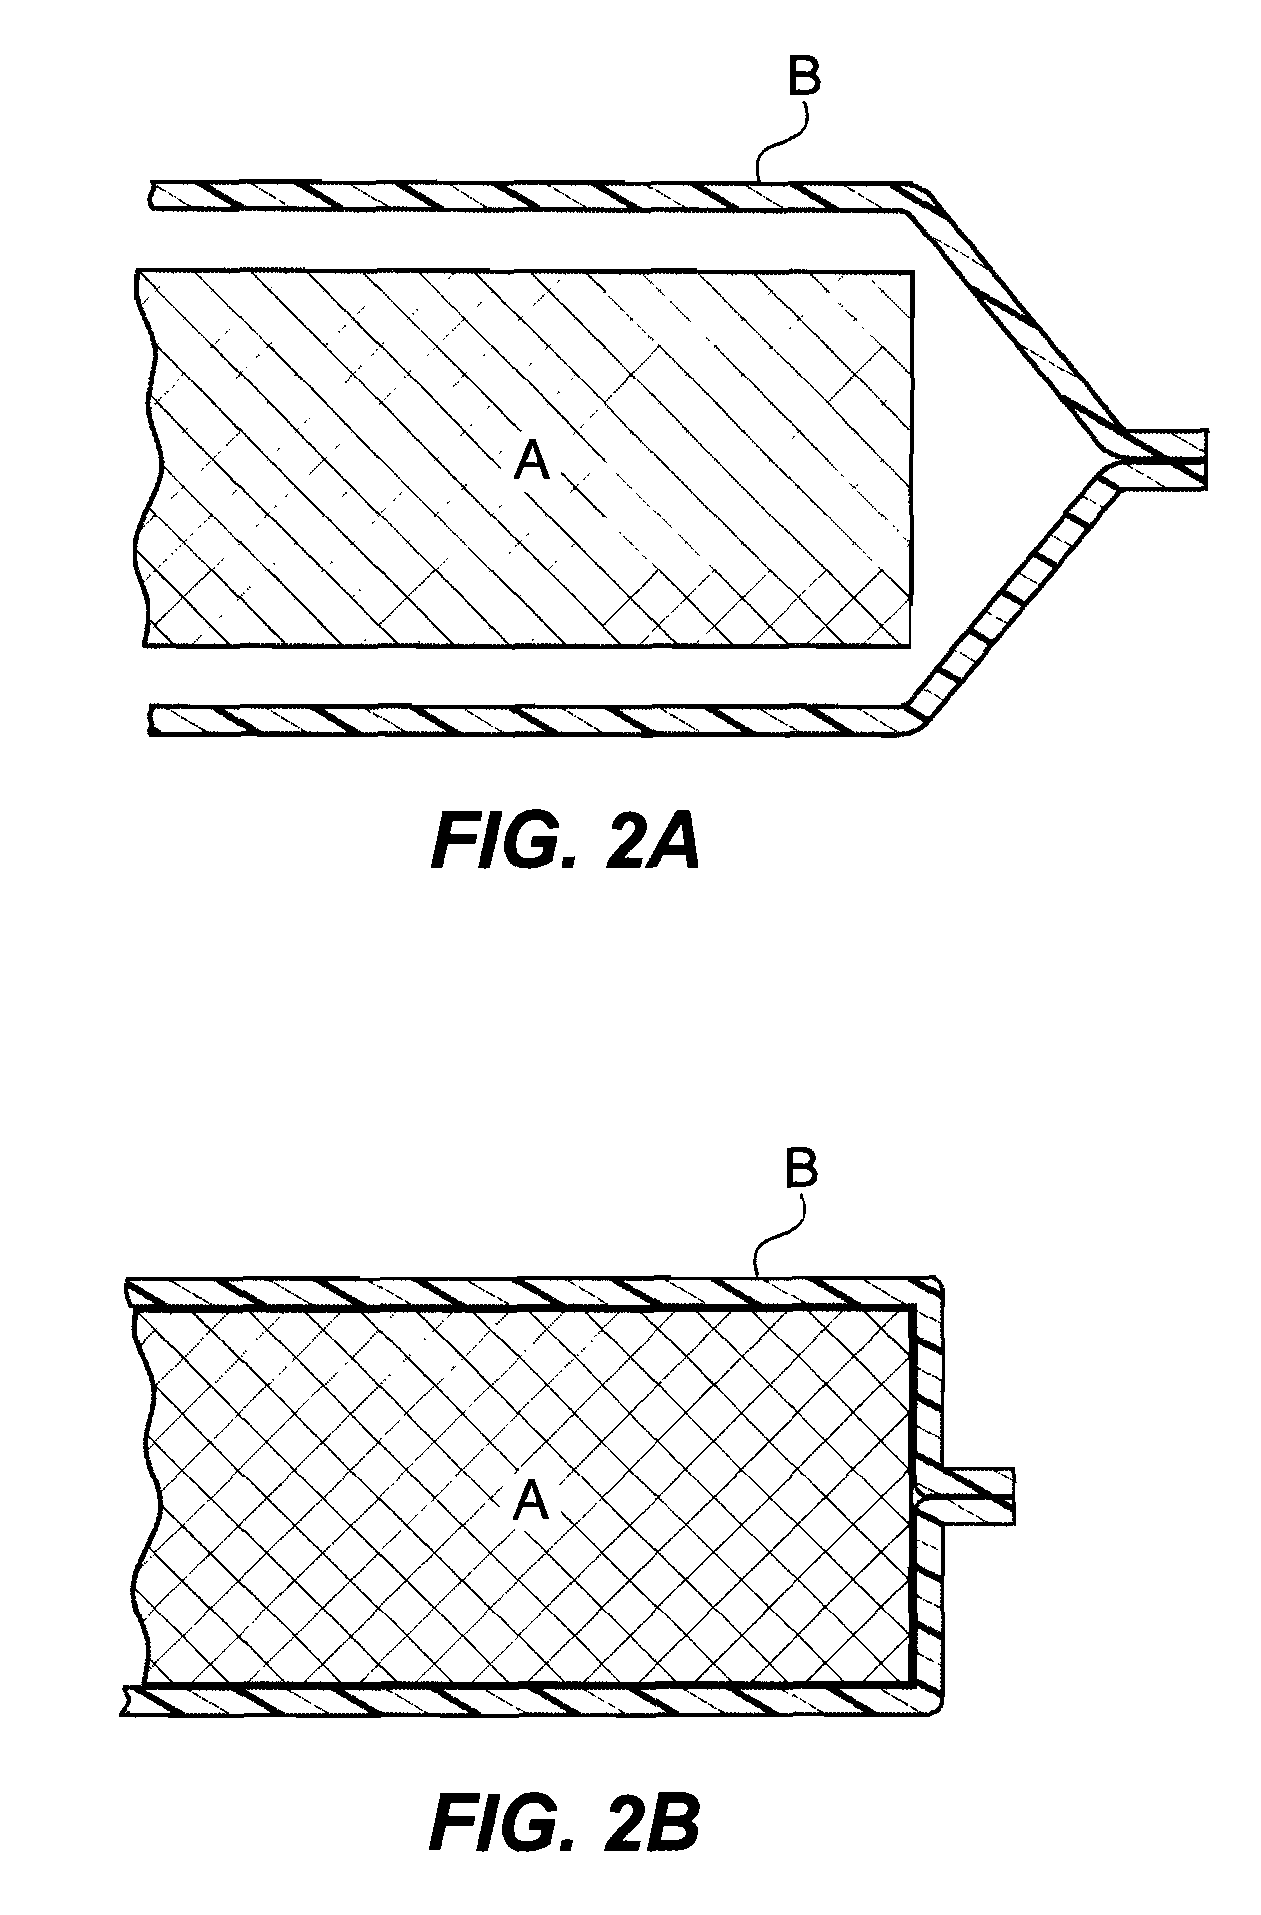 Heat-shrinkable anti-fomitic device incorporating anti-microbial metal